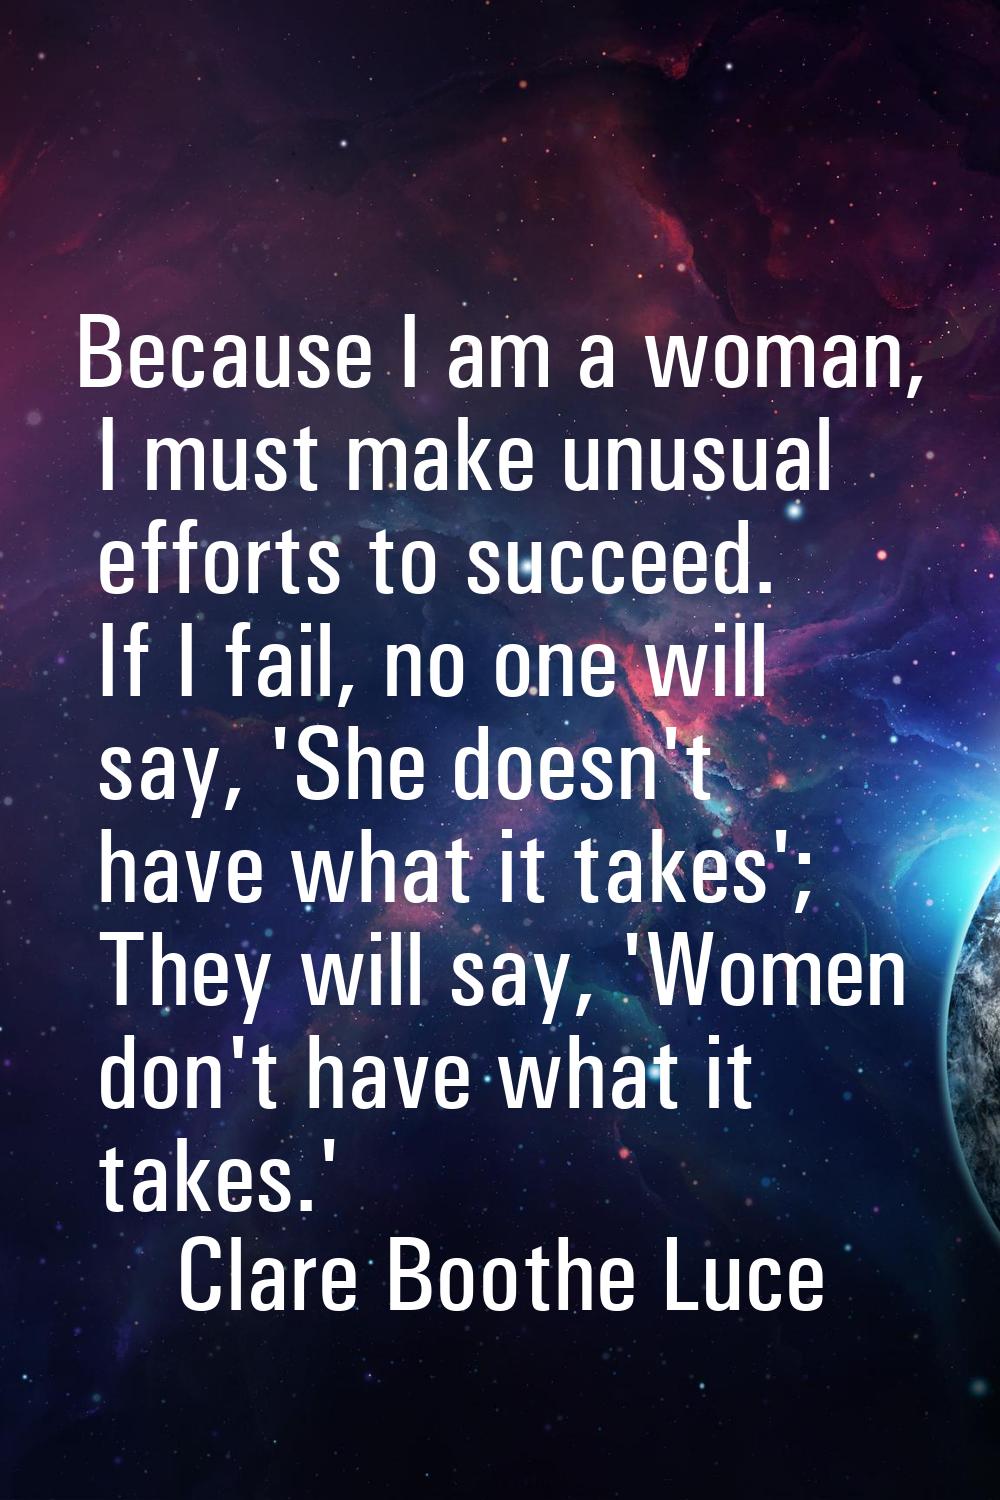 Because I am a woman, I must make unusual efforts to succeed. If I fail, no one will say, 'She does